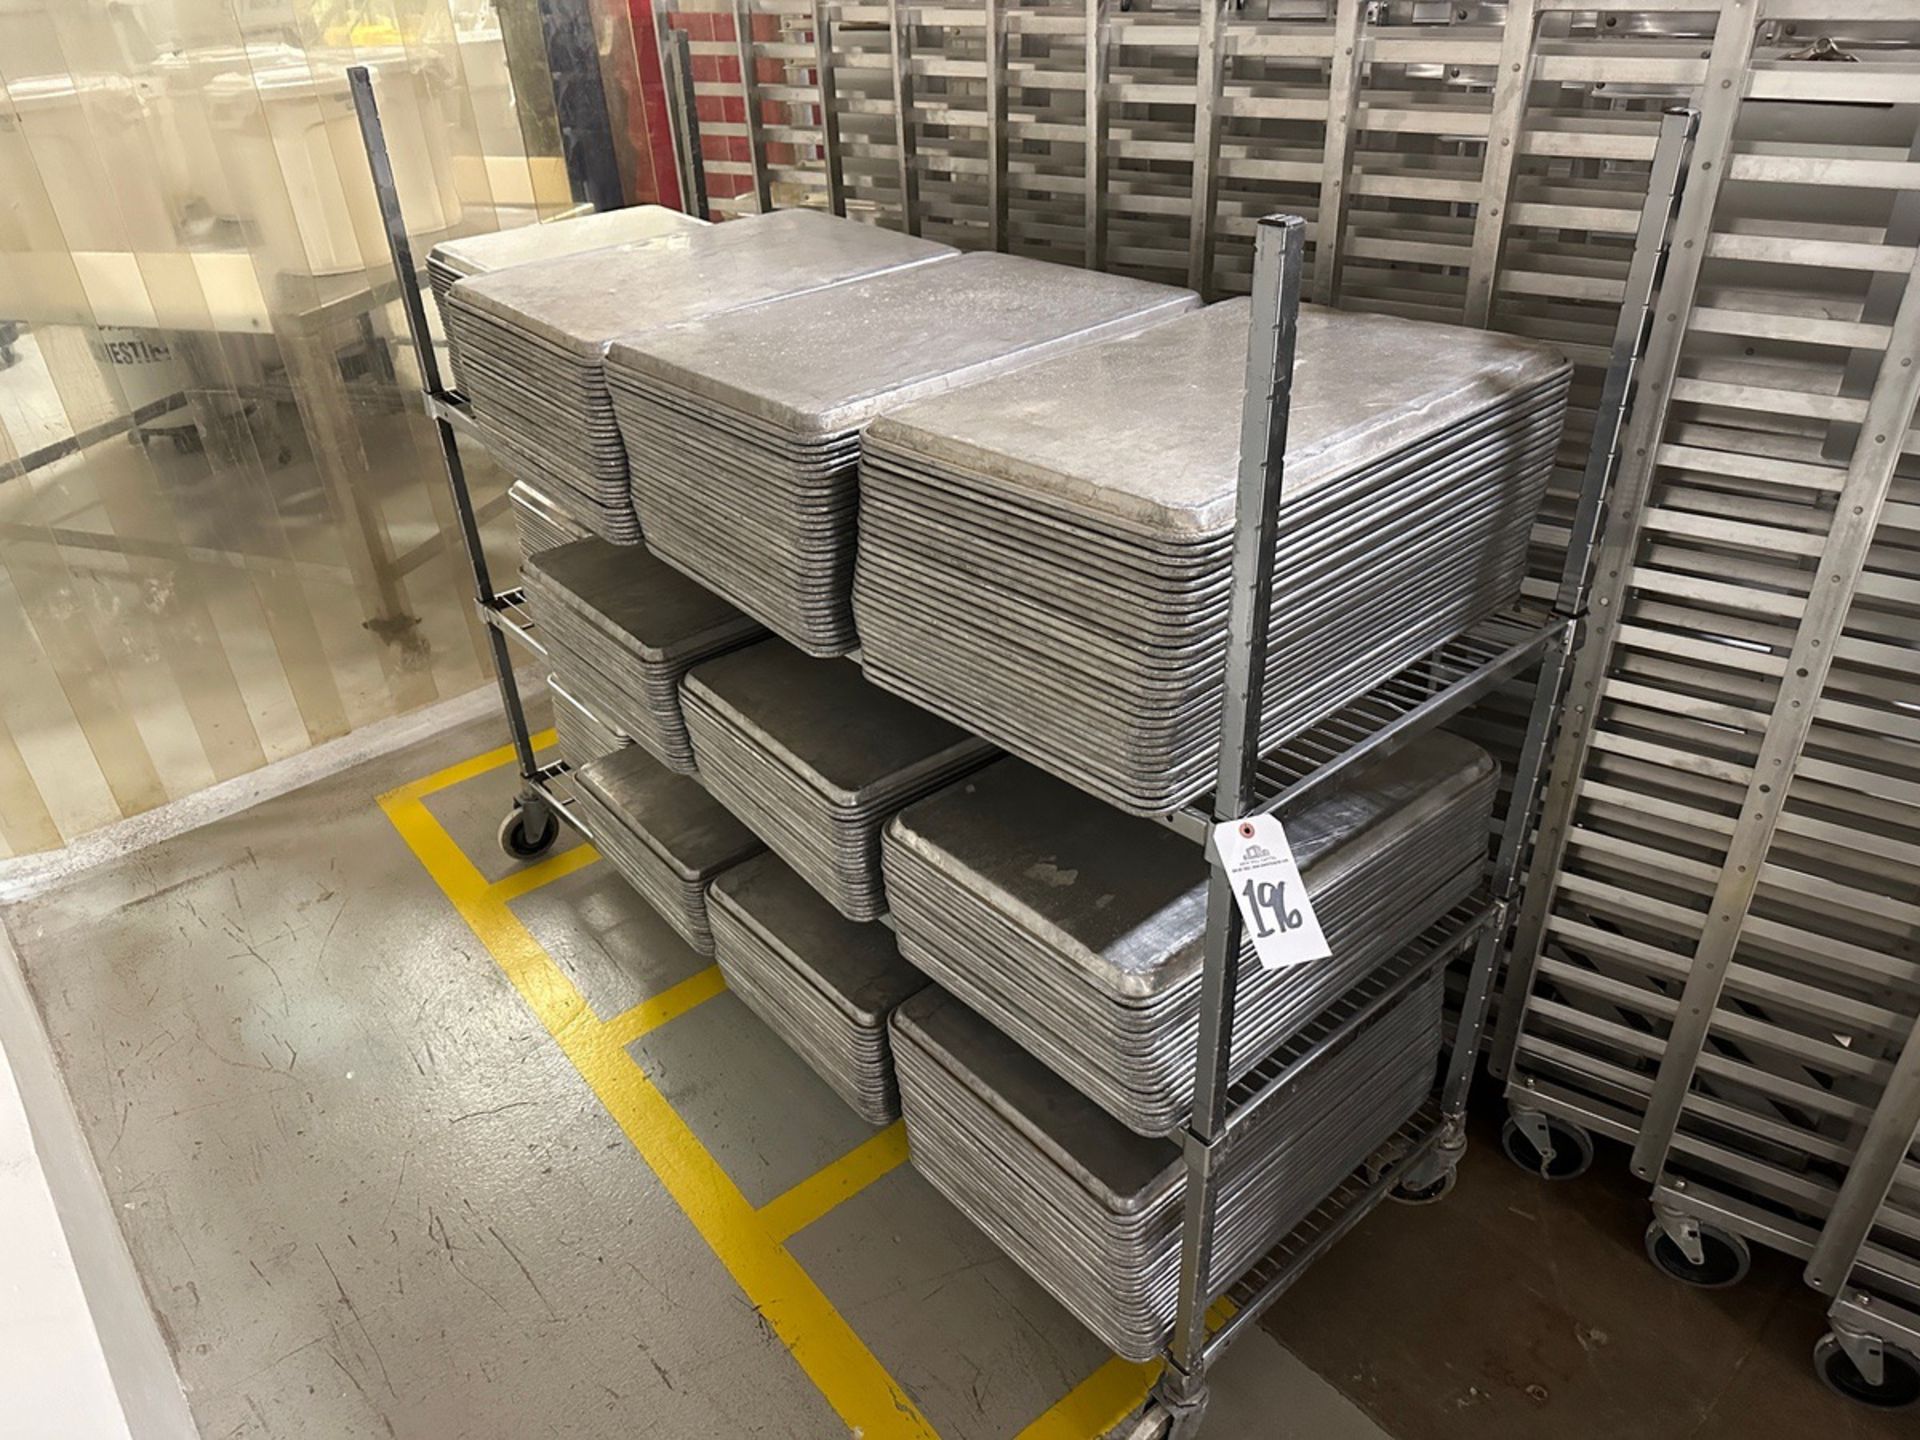 Lot of Sheet Trays on Wire Rack | Rig Fee $35